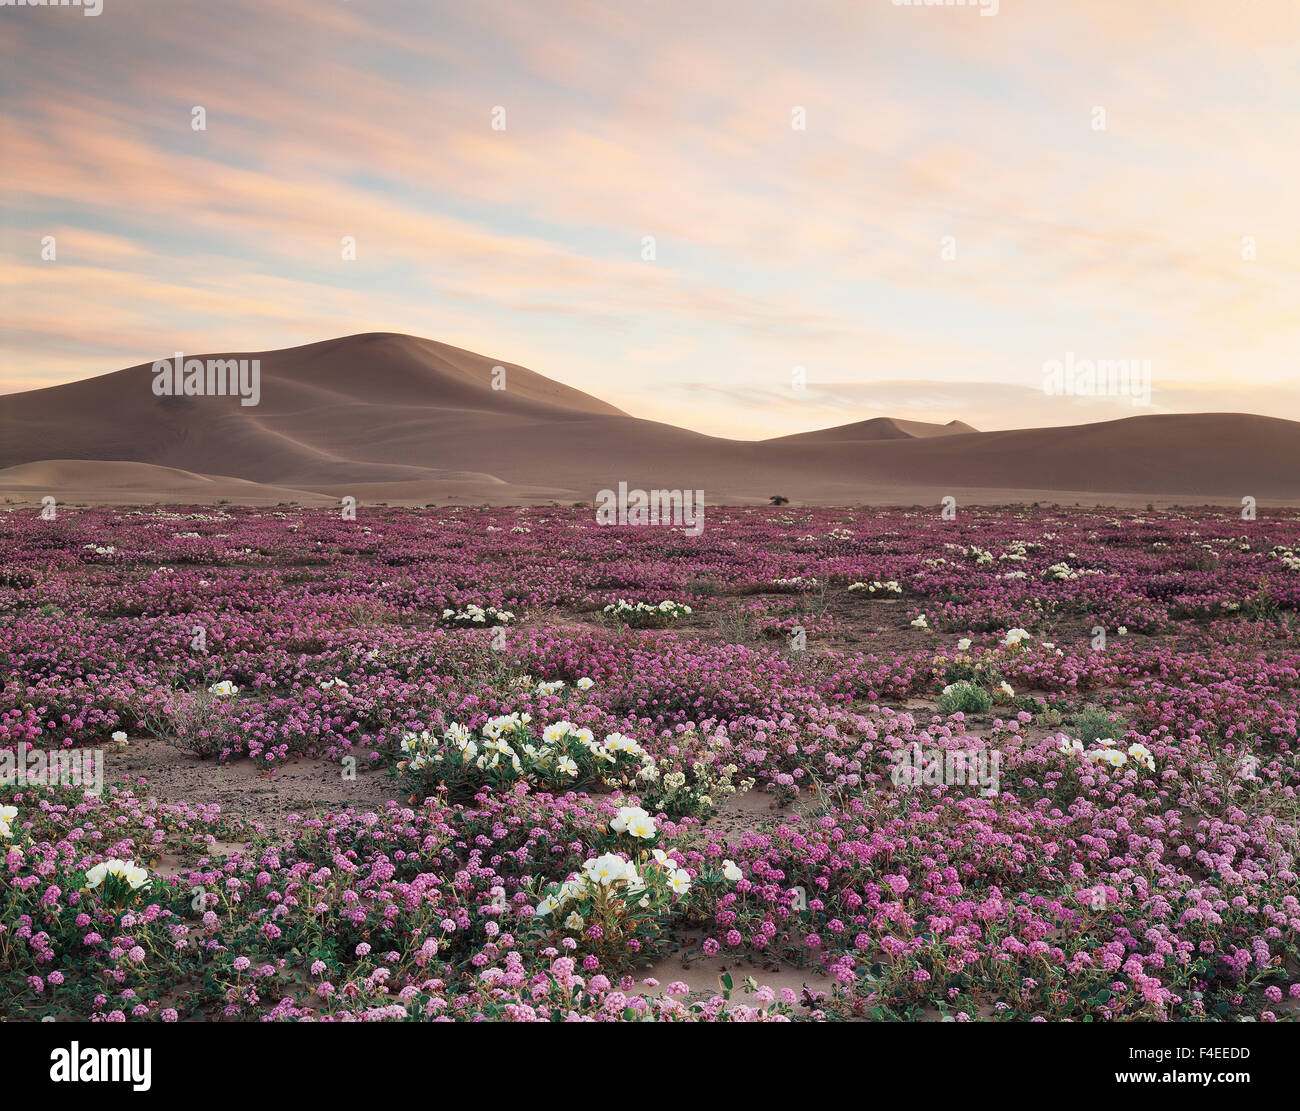 California, Sand Verbena Wildflowers (Abronia villosa) and Dune Evening Primrose (Oenothera deltoides) flowers on the Dumont Dunes in the Mojave Desert (Large format sizes available) Stock Photo